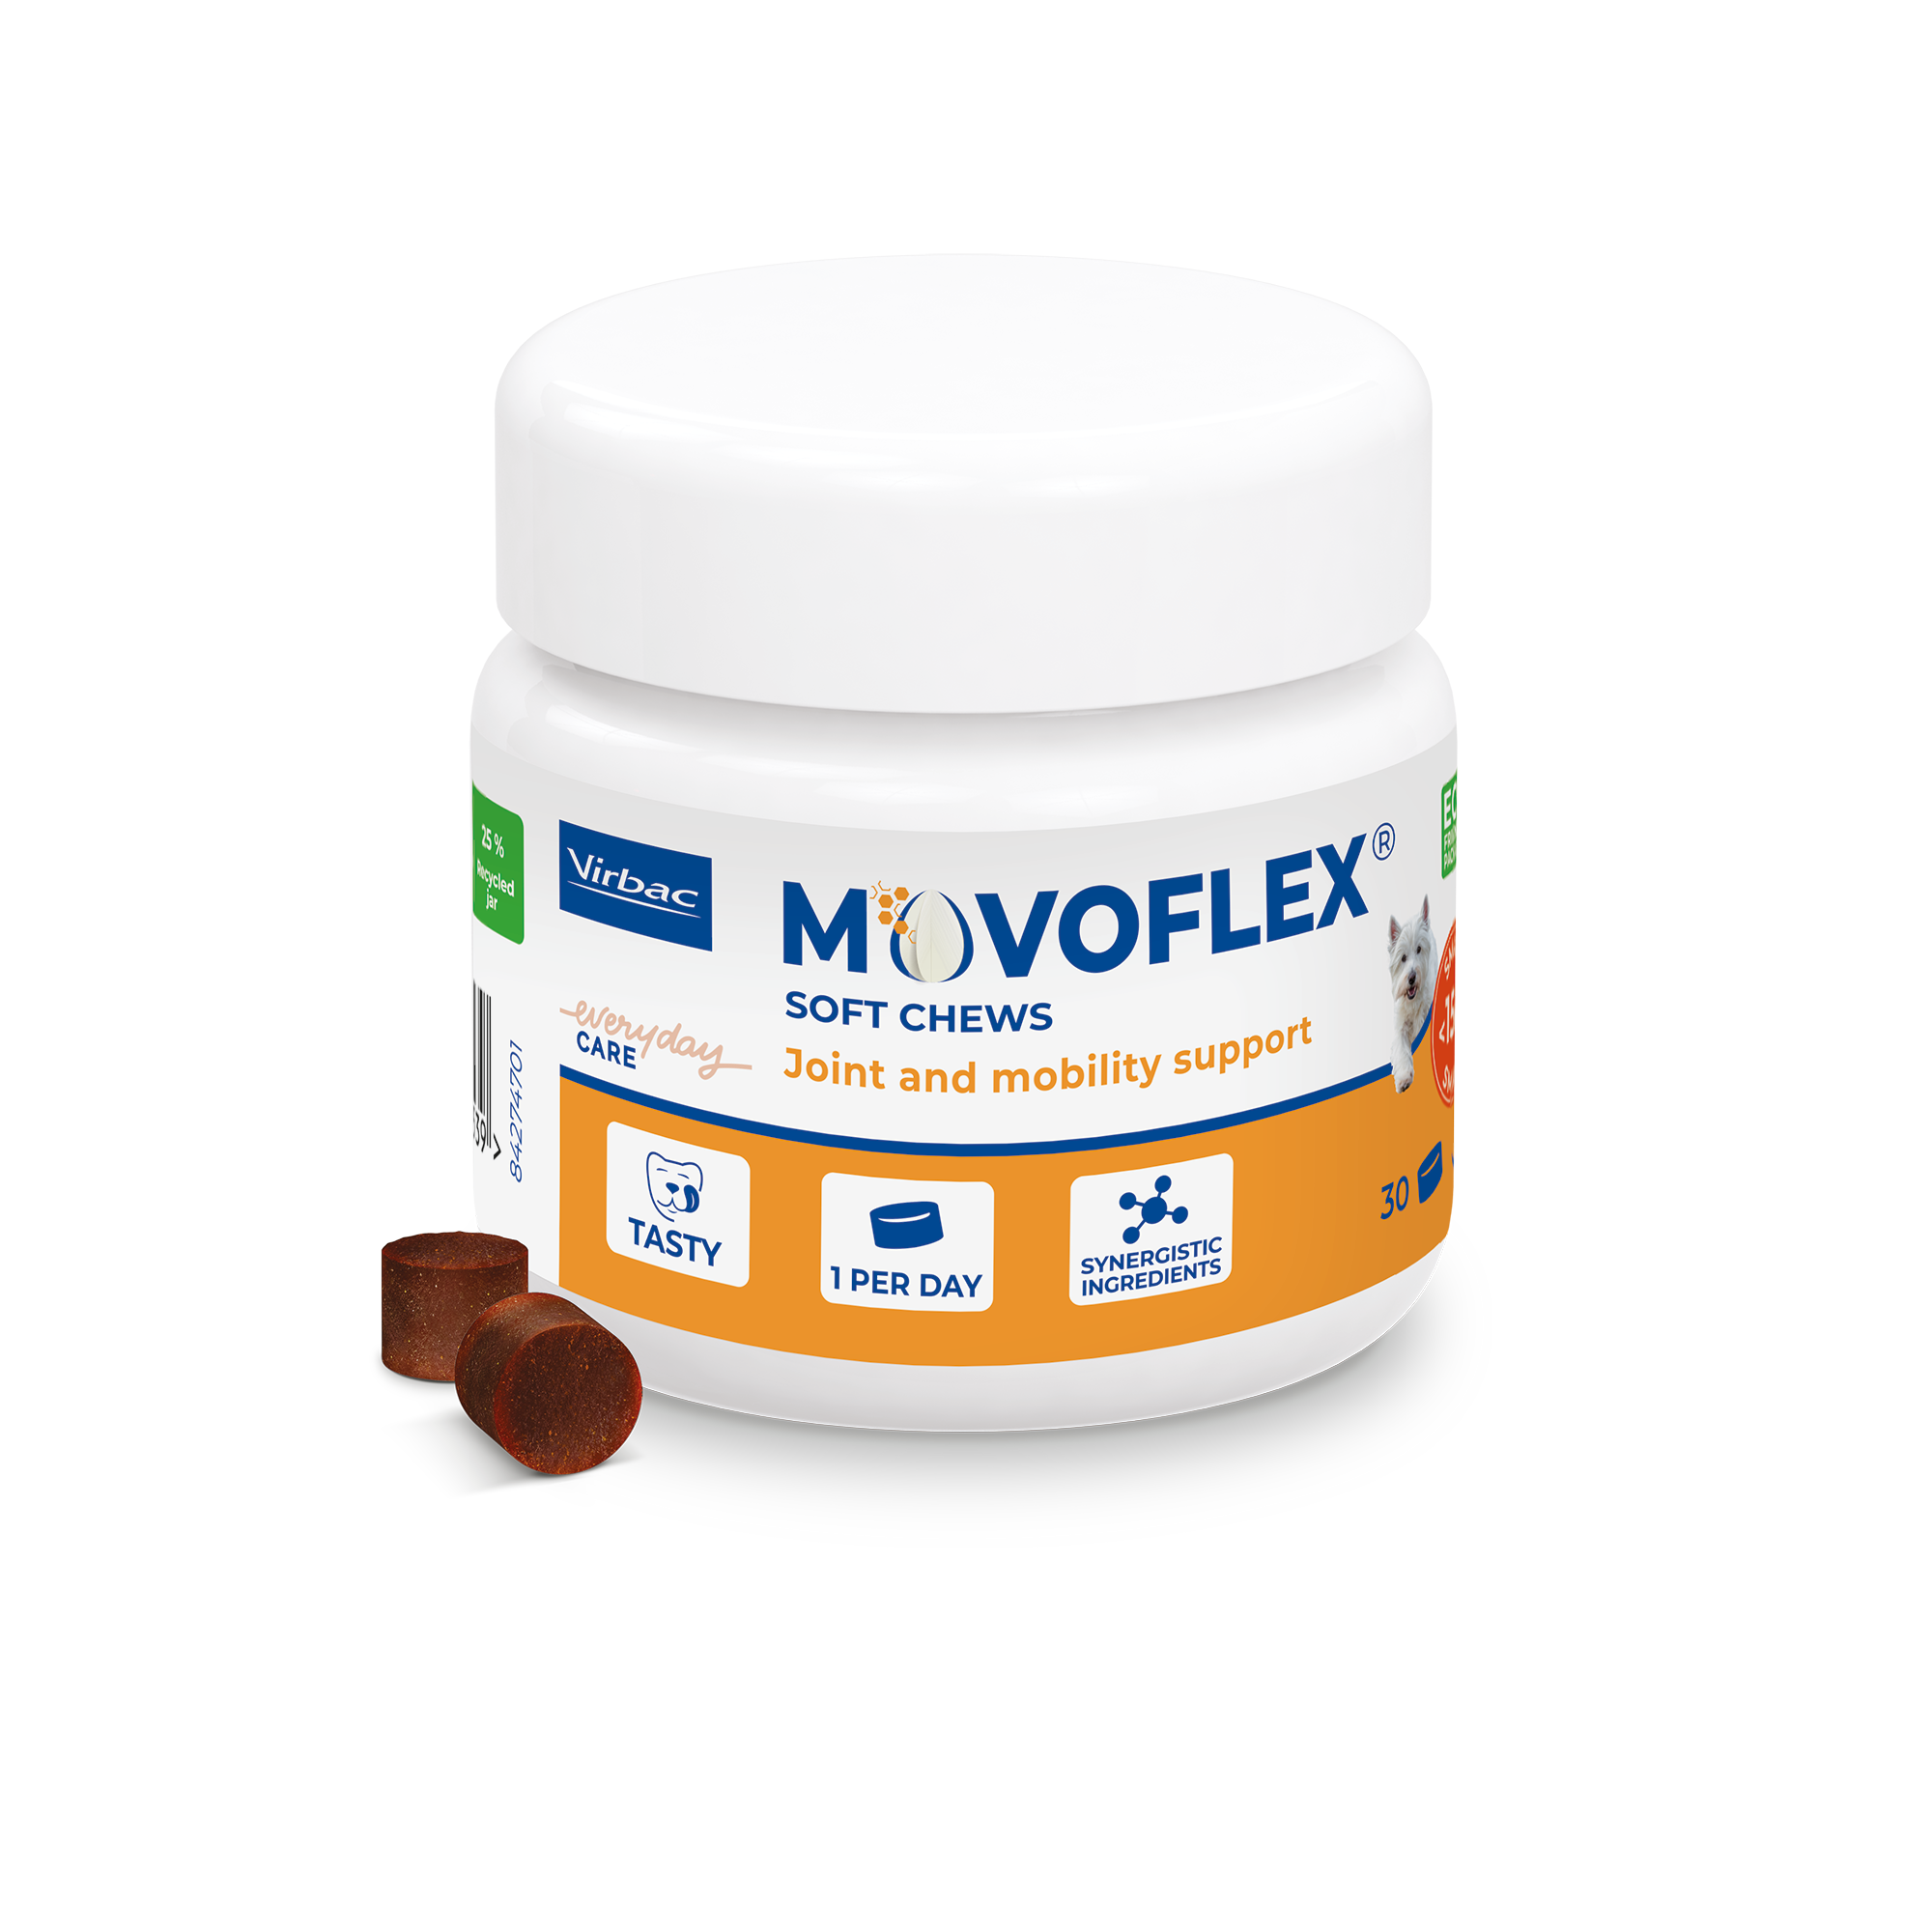 Virbac Movoflex Joint Supplement Soft Chews For Dogs x 30